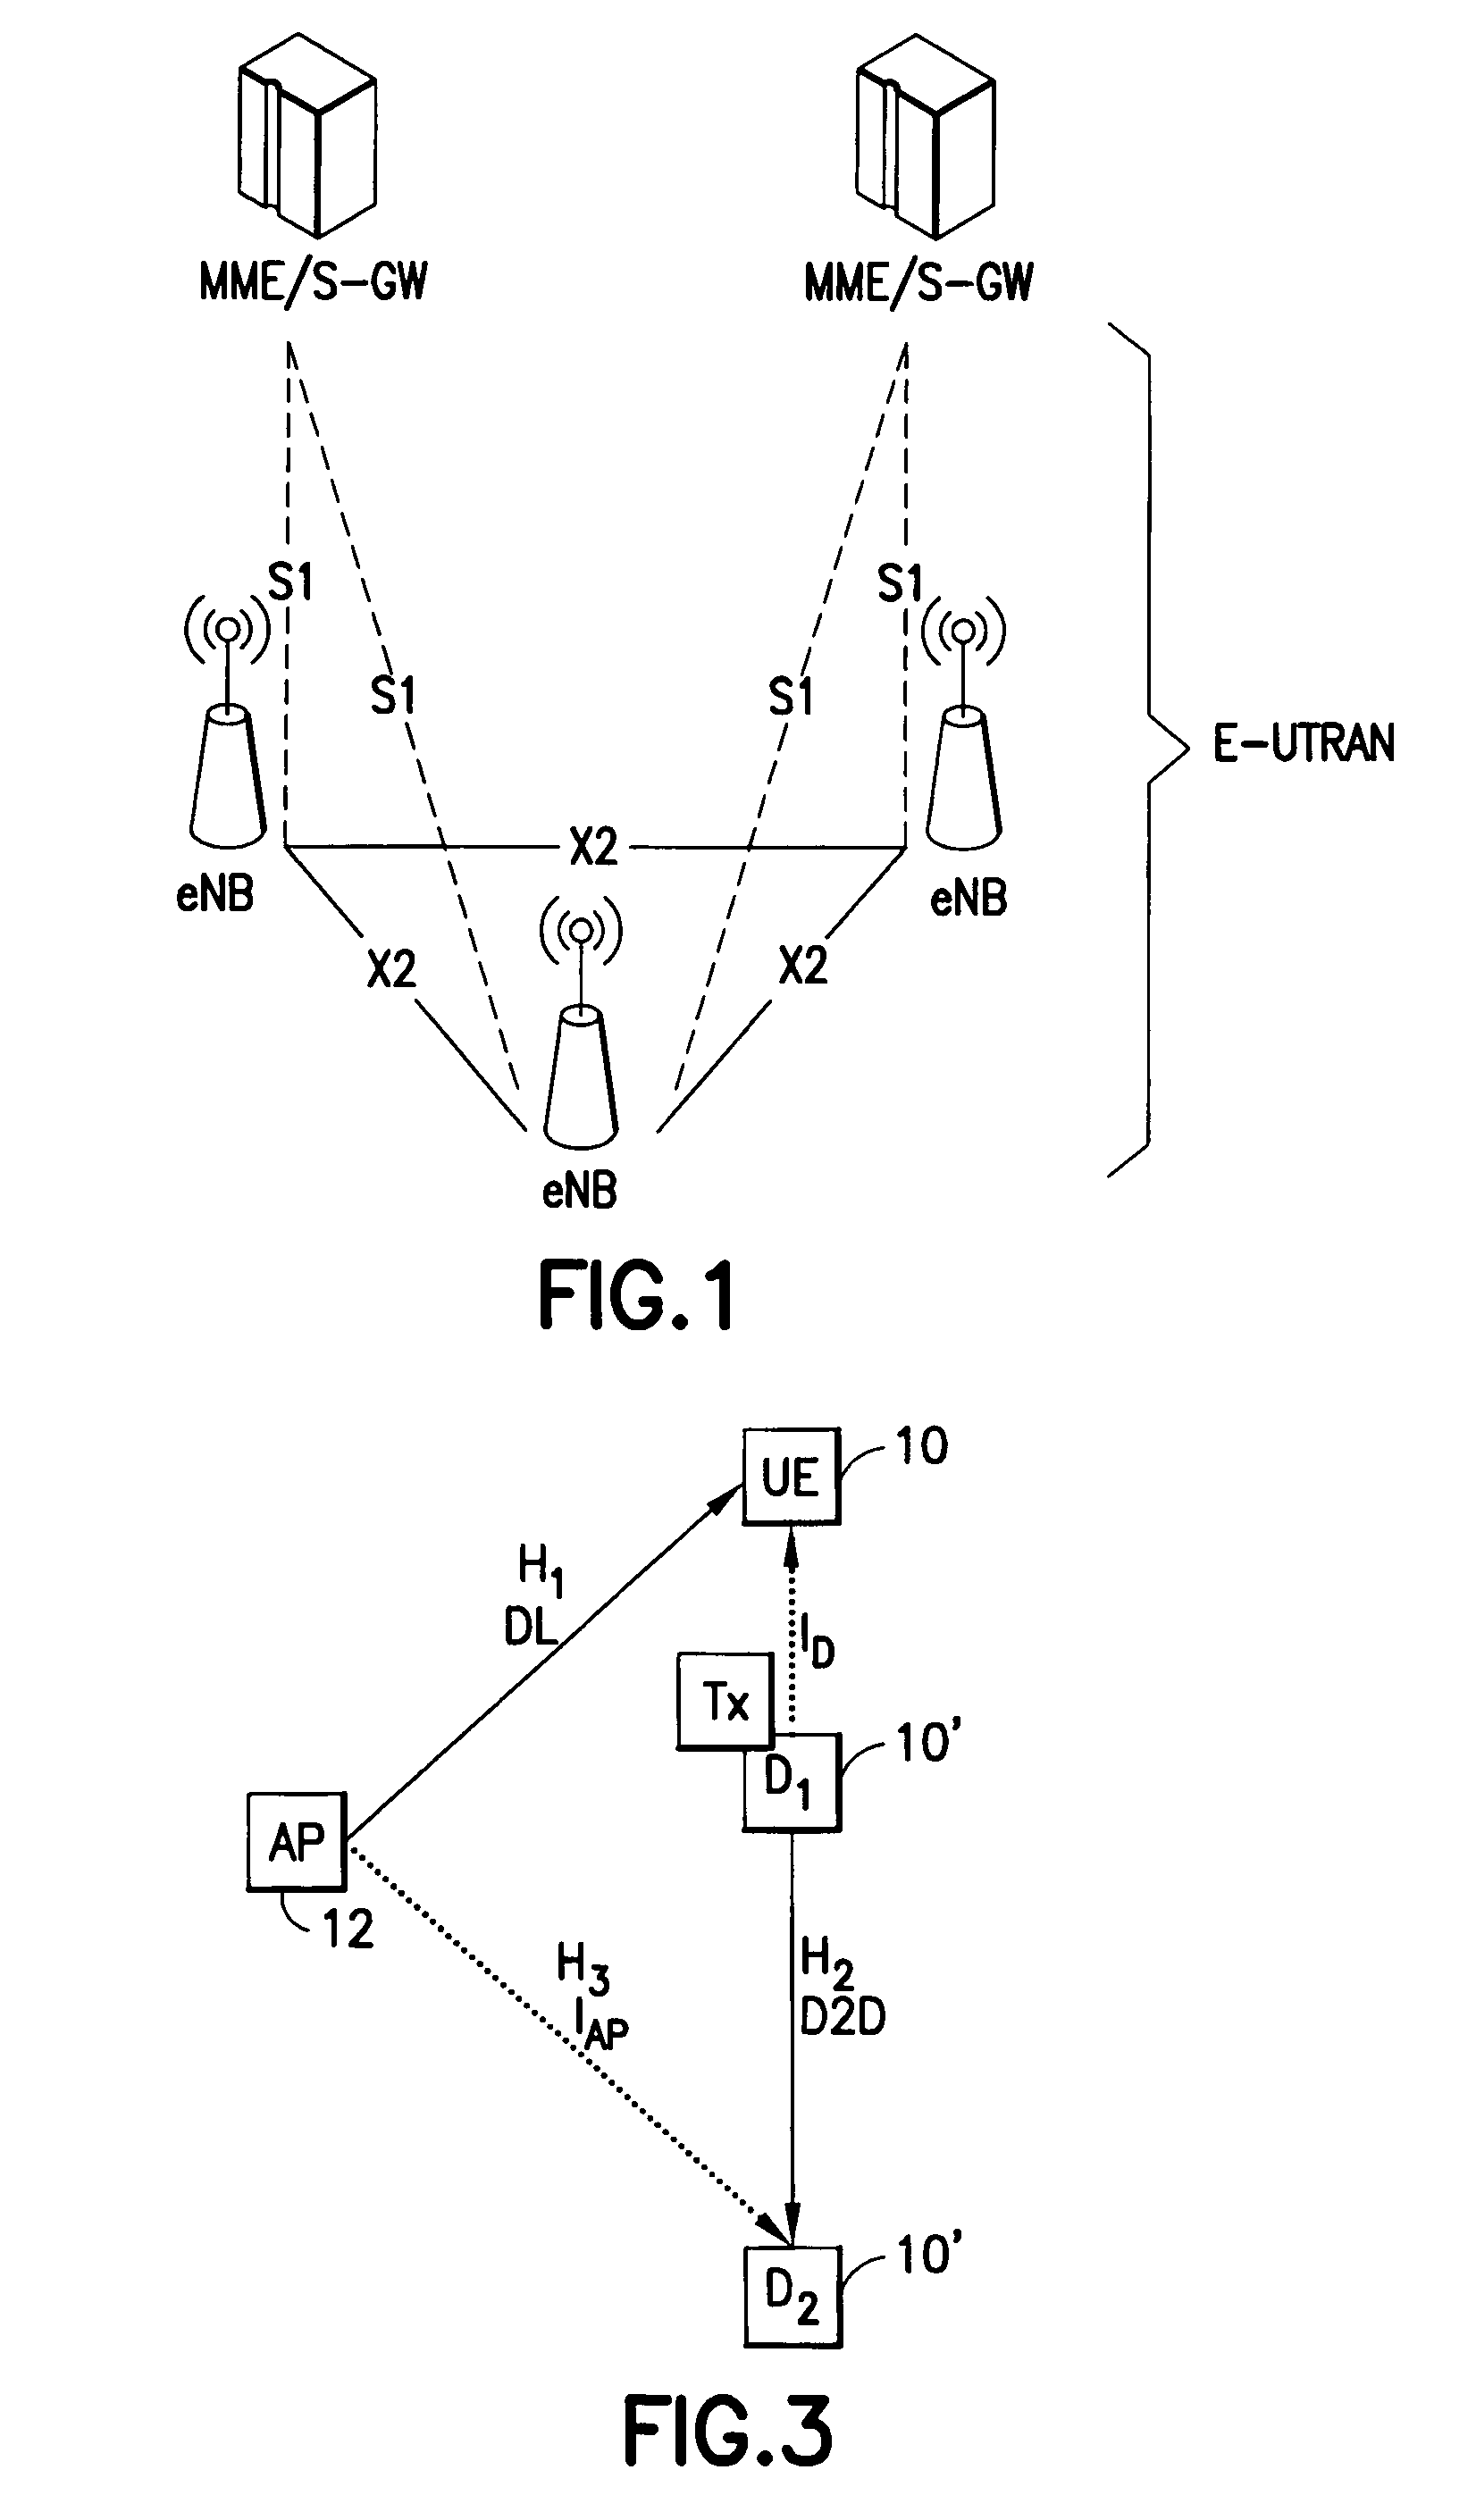 Interference suppression during device-to-device communications